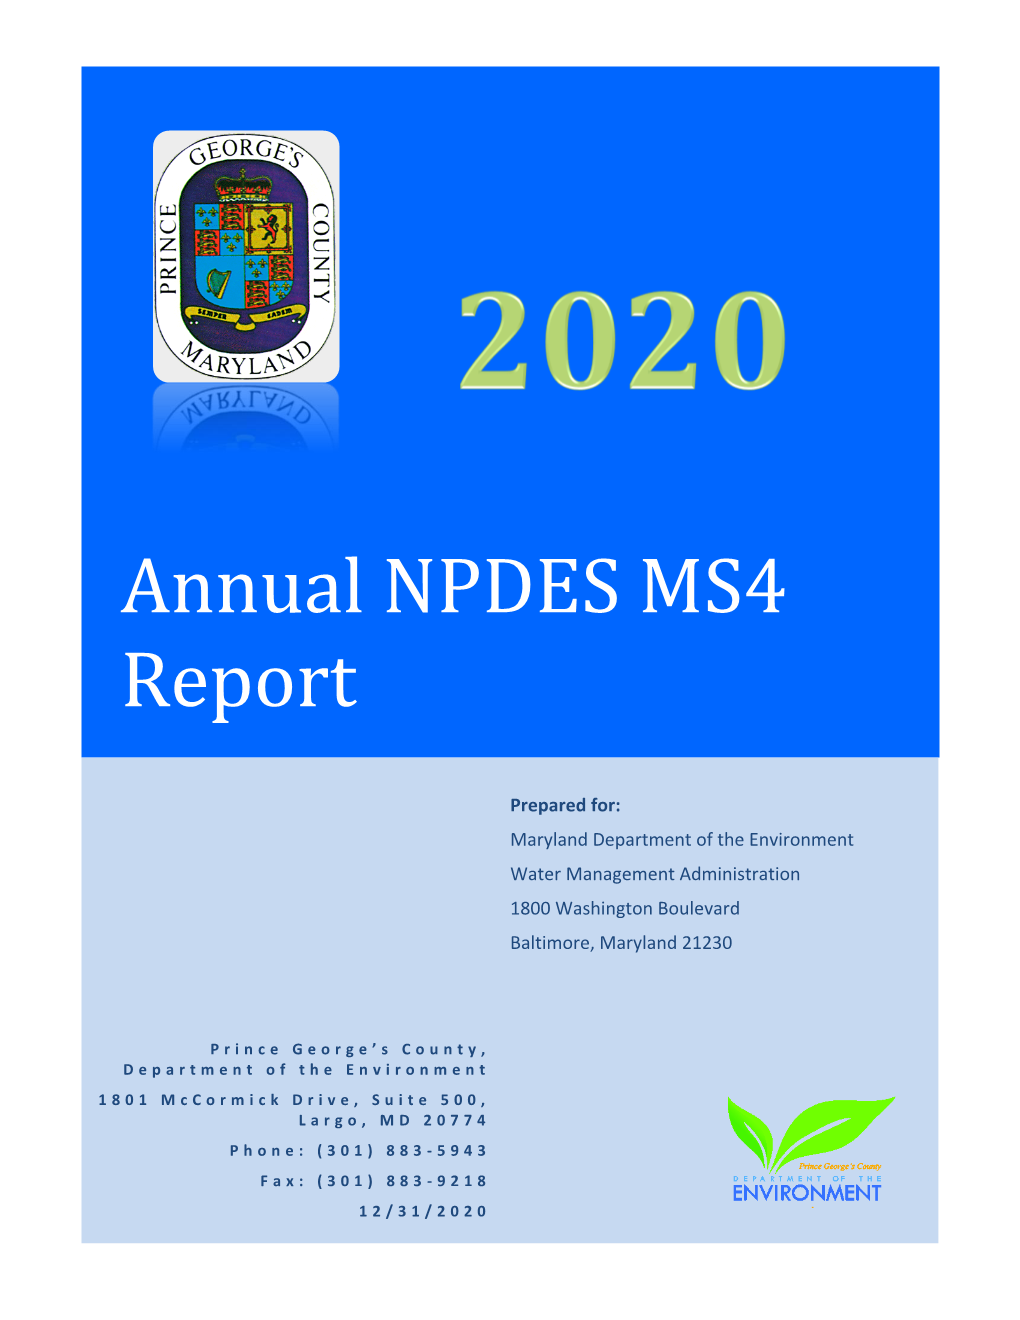 Annual NPDES MS4 Report 2020